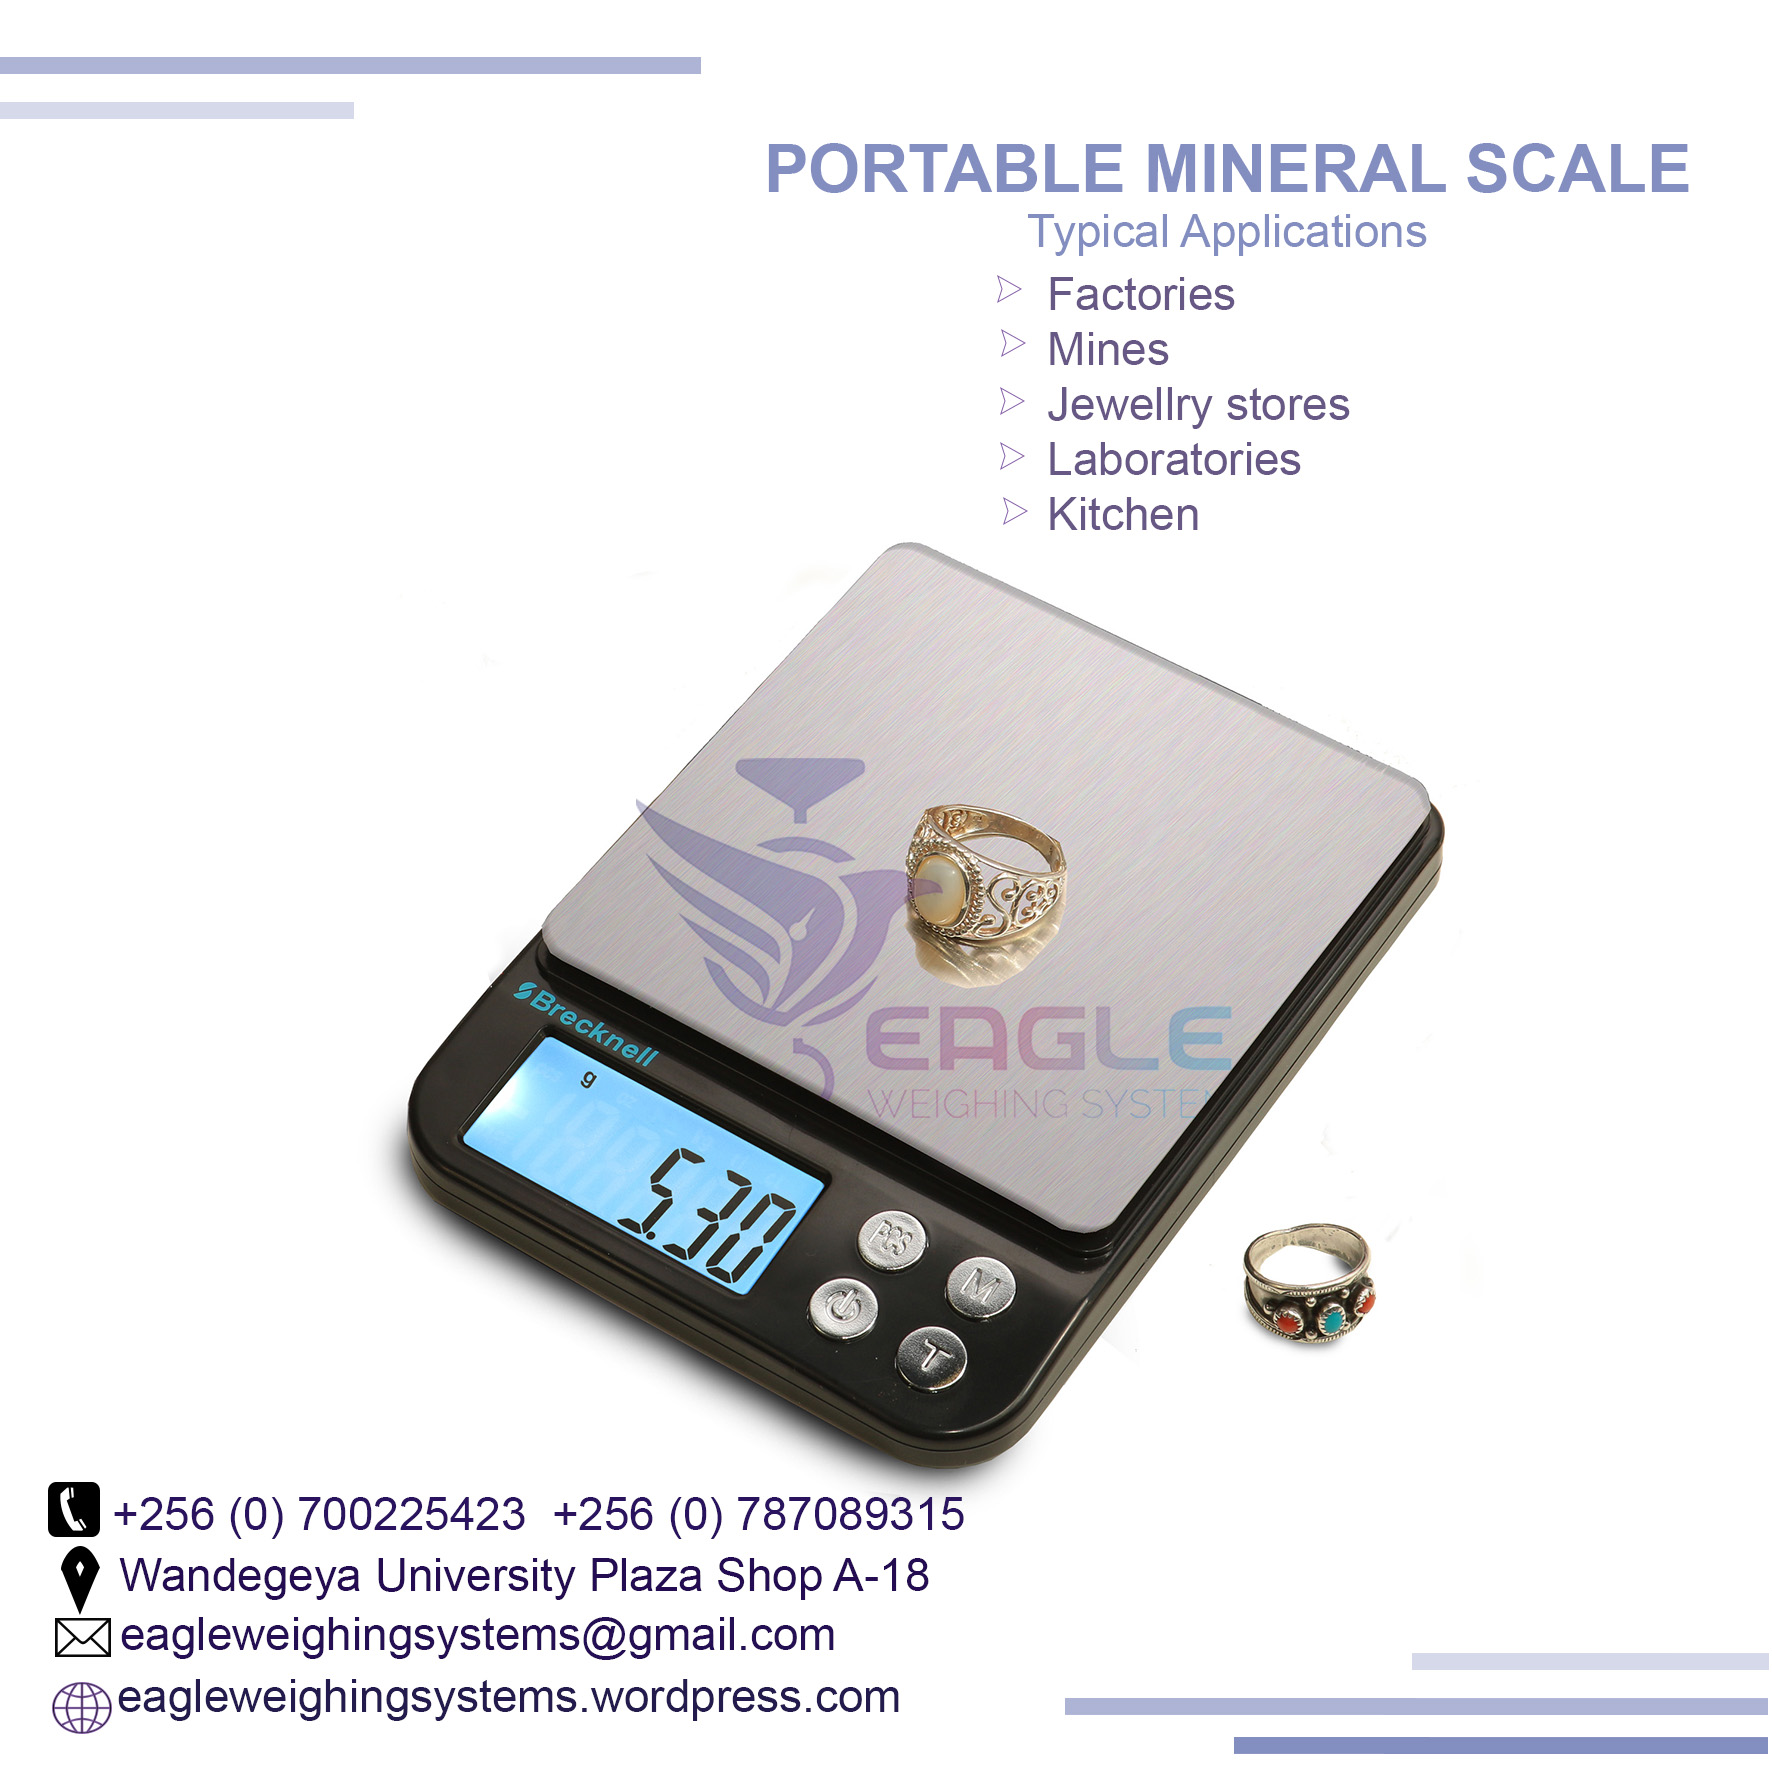 Portable mineral, jewelry weighing Scales in Kampala Uganda, Kampala Central Division, Central, Uganda